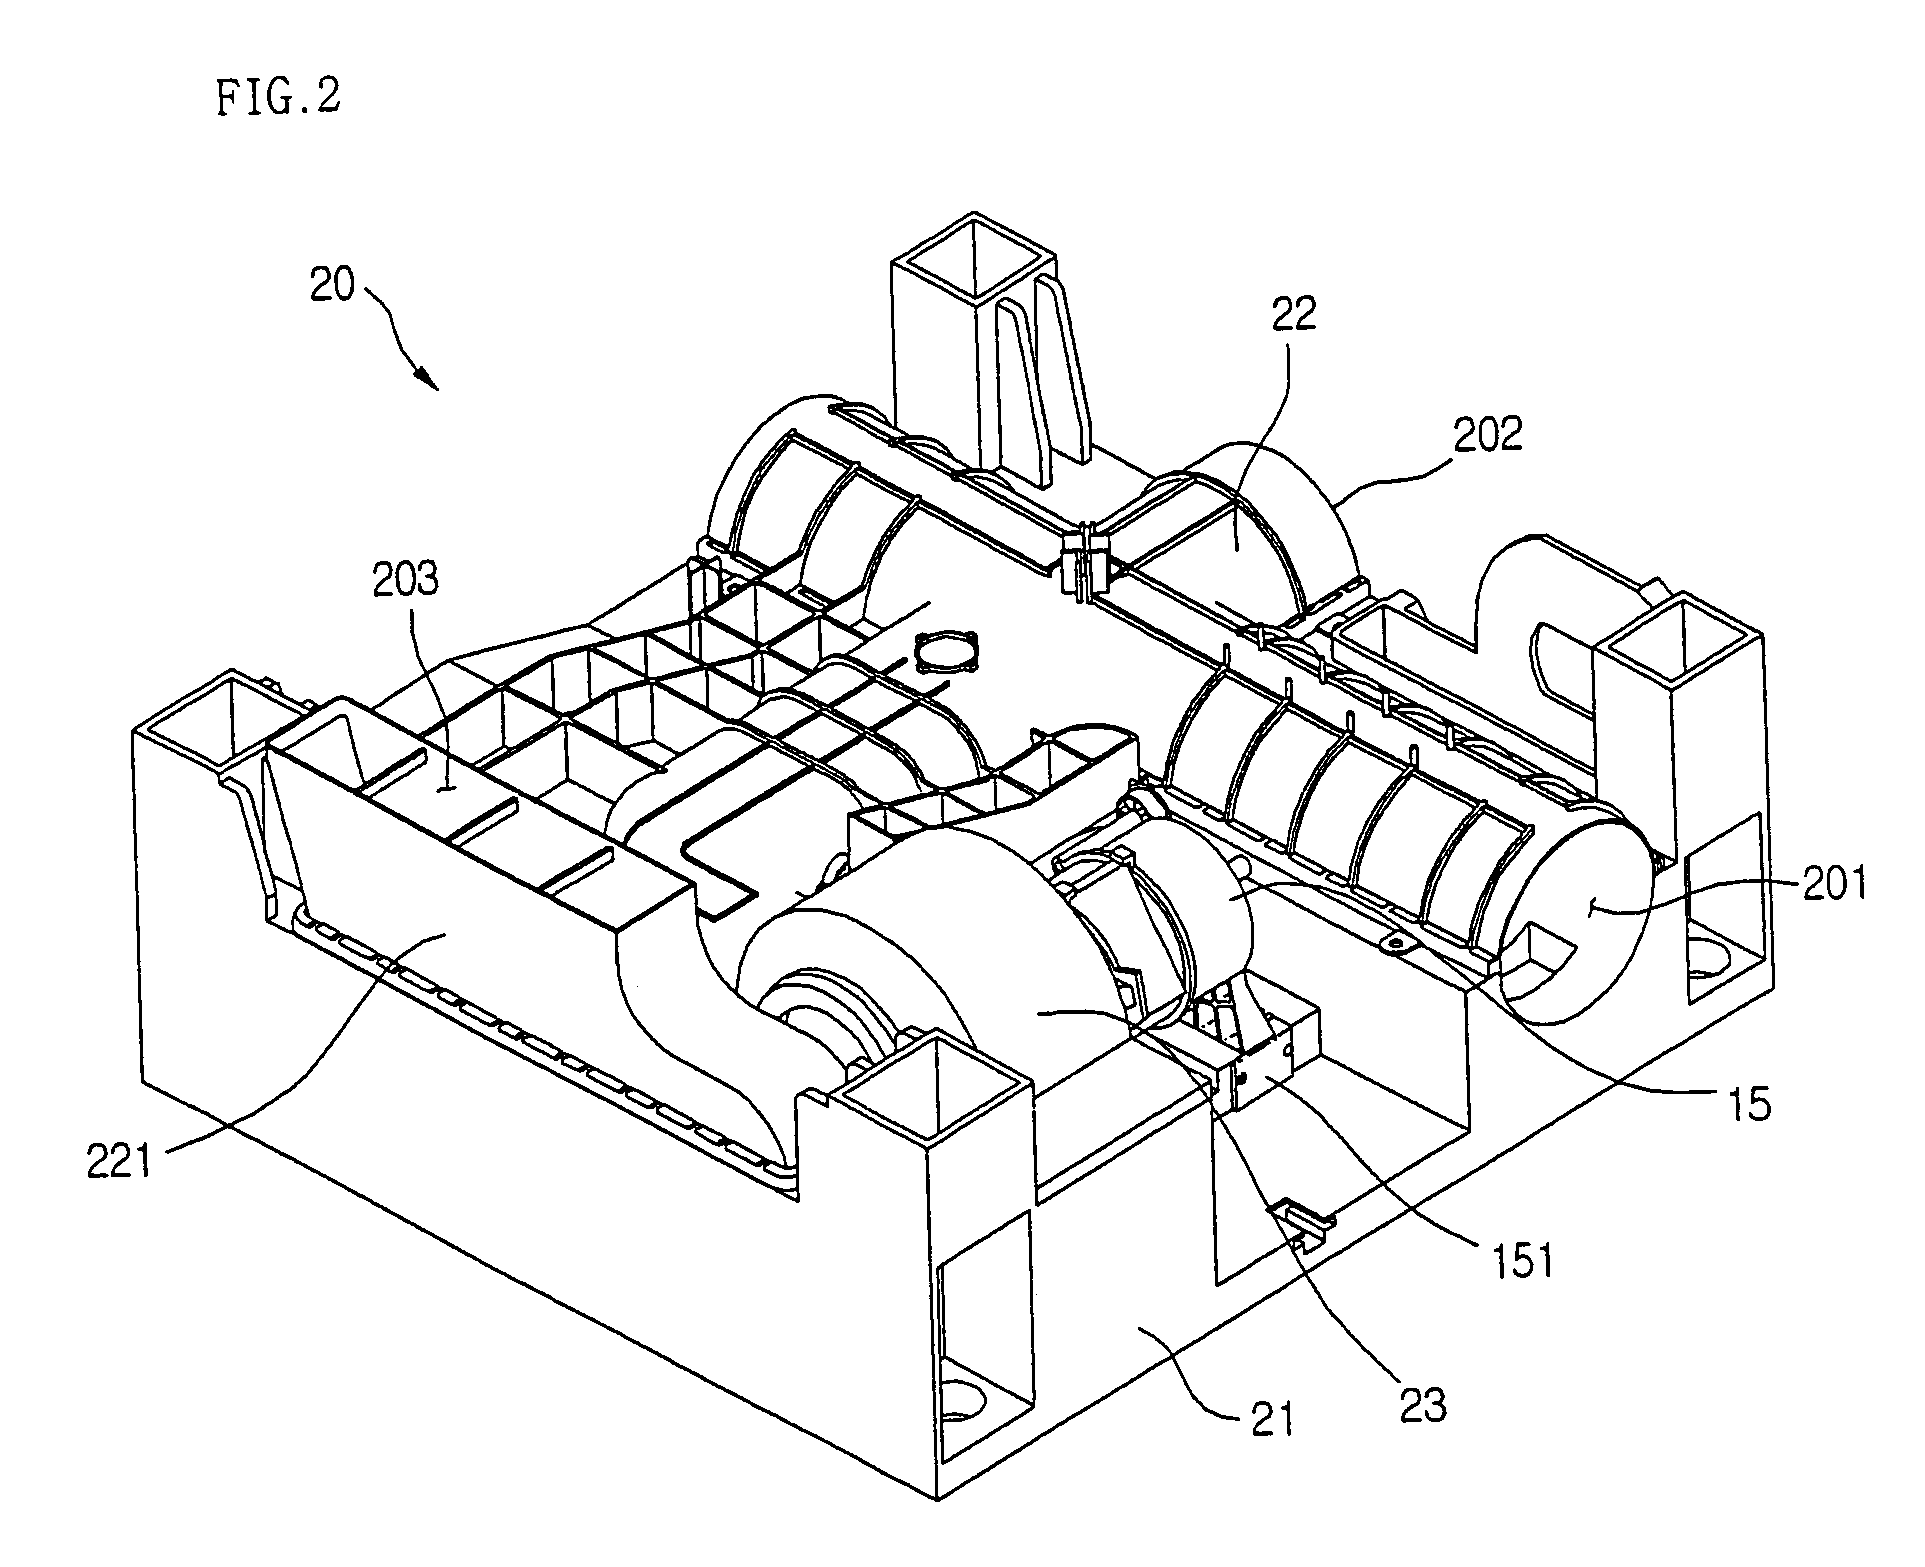 Laundry dryer and impurity entry preventing structure for the same